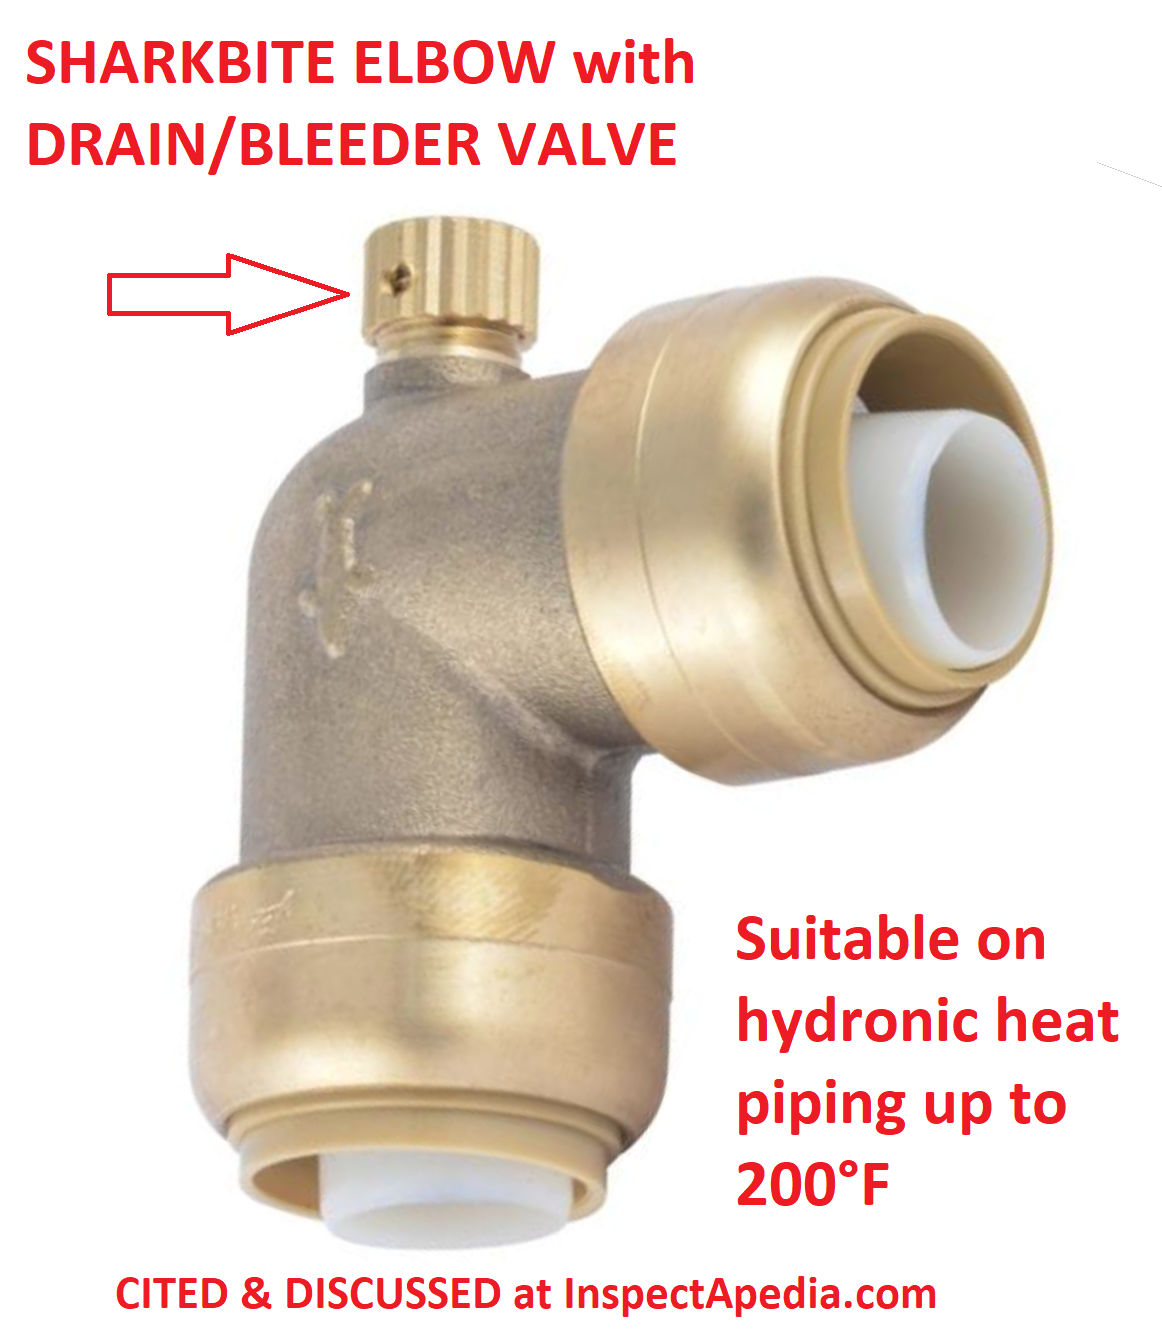 How To Bleed A Baseboard Radiator Hot Water Heat Air Bleeder Valves Guide to Air Bleeders for Radiators,  Baseboards, Convectors